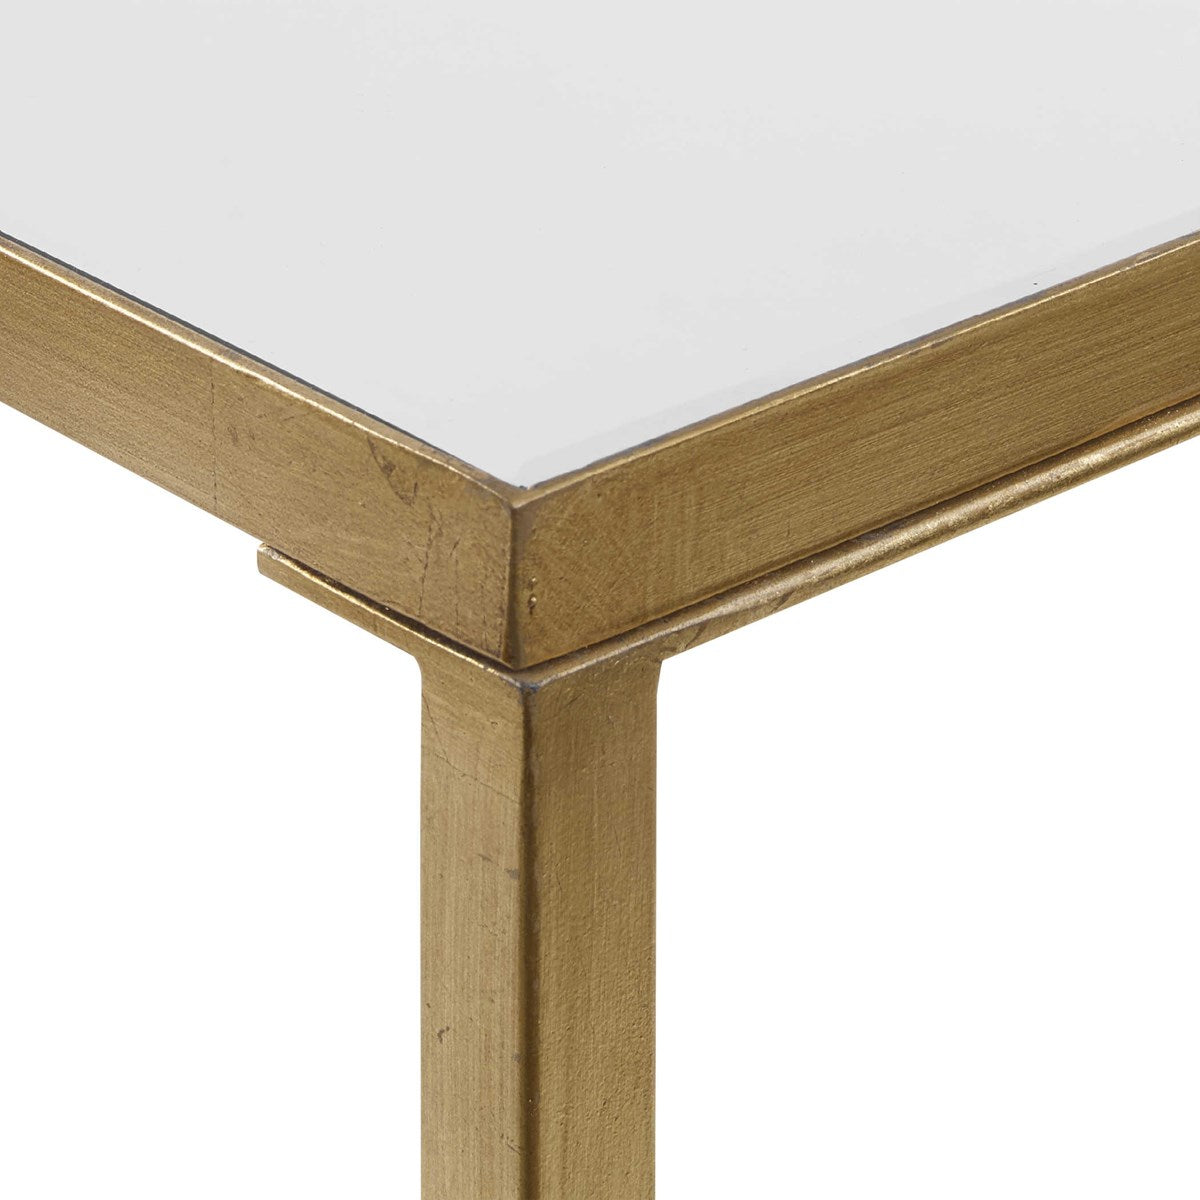 Hayley Console Table, Gold